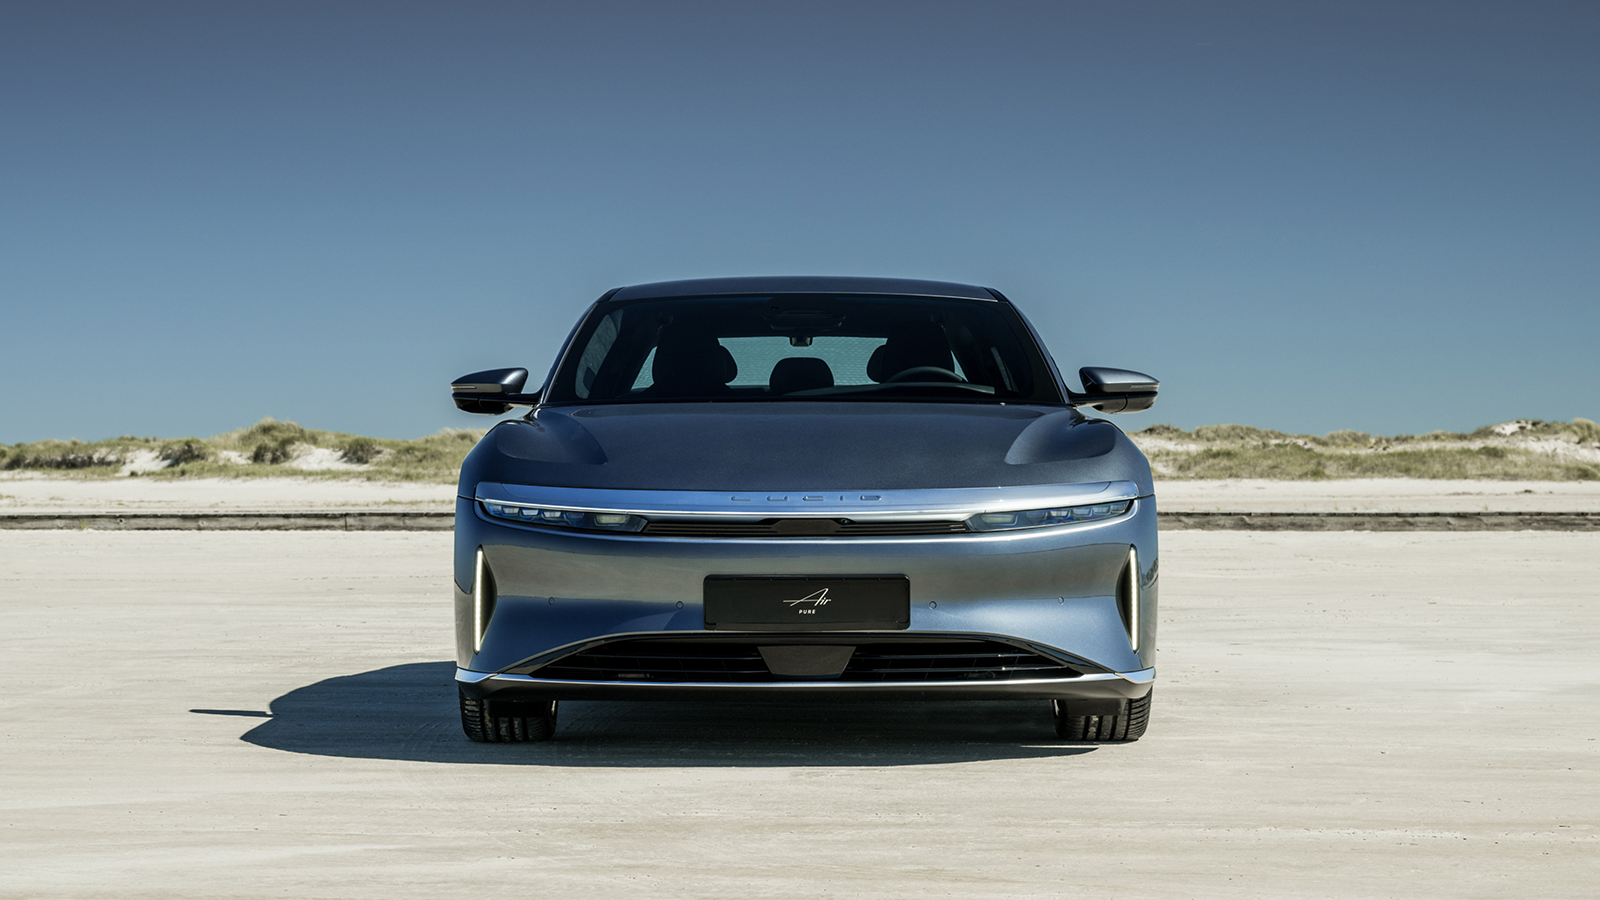 Lucid claims to have achieved the best energy efficiency yet for an electric car